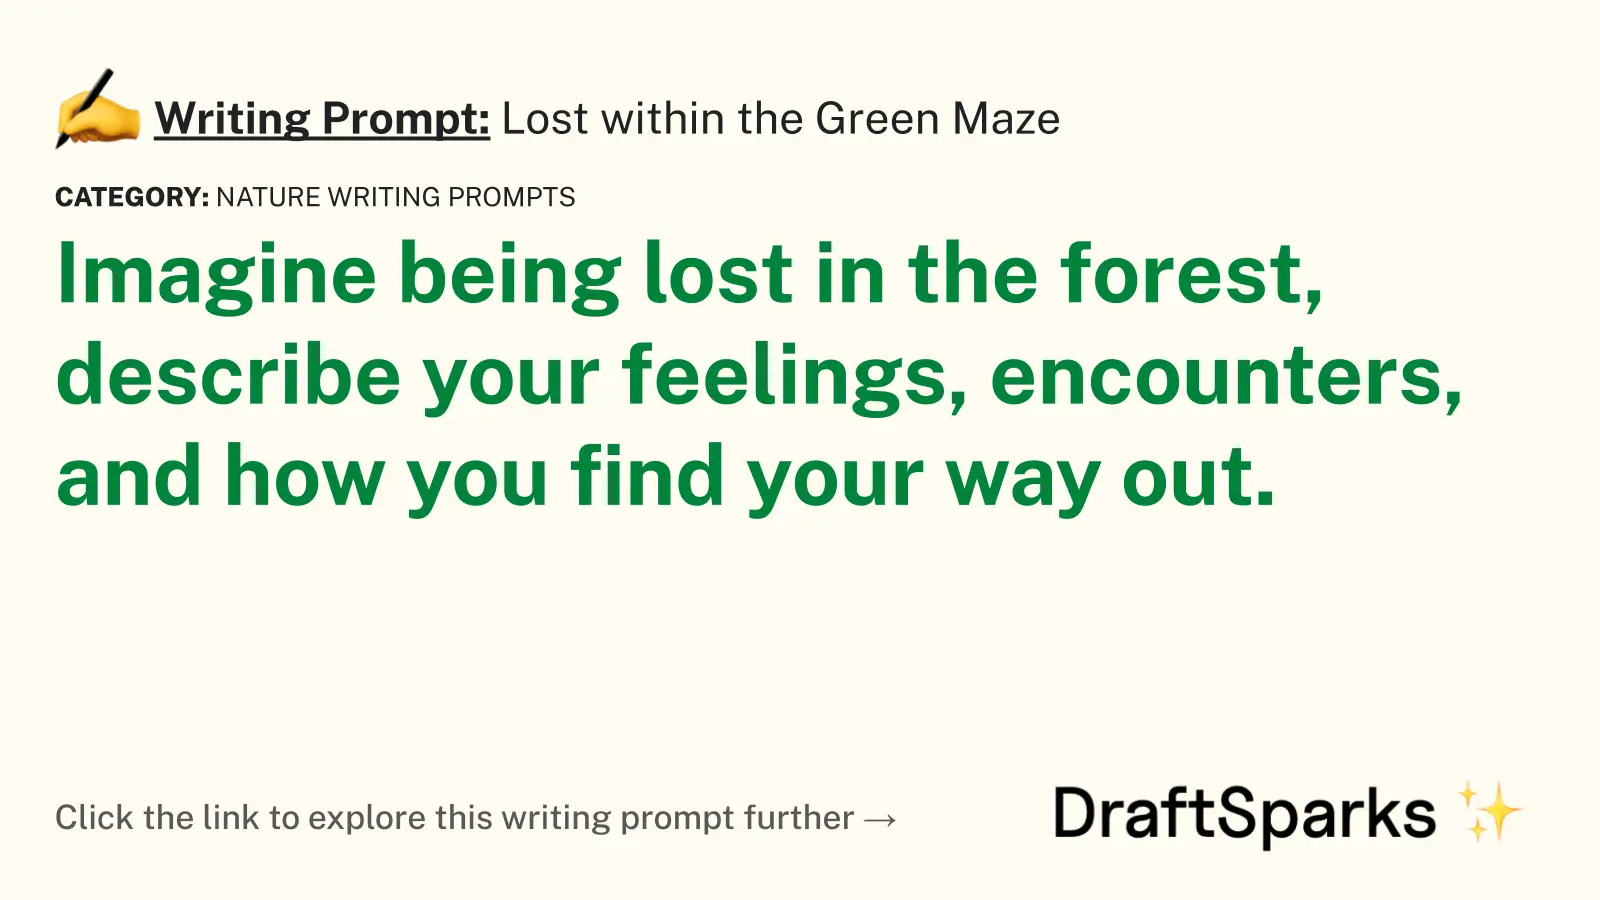 Lost within the Green Maze